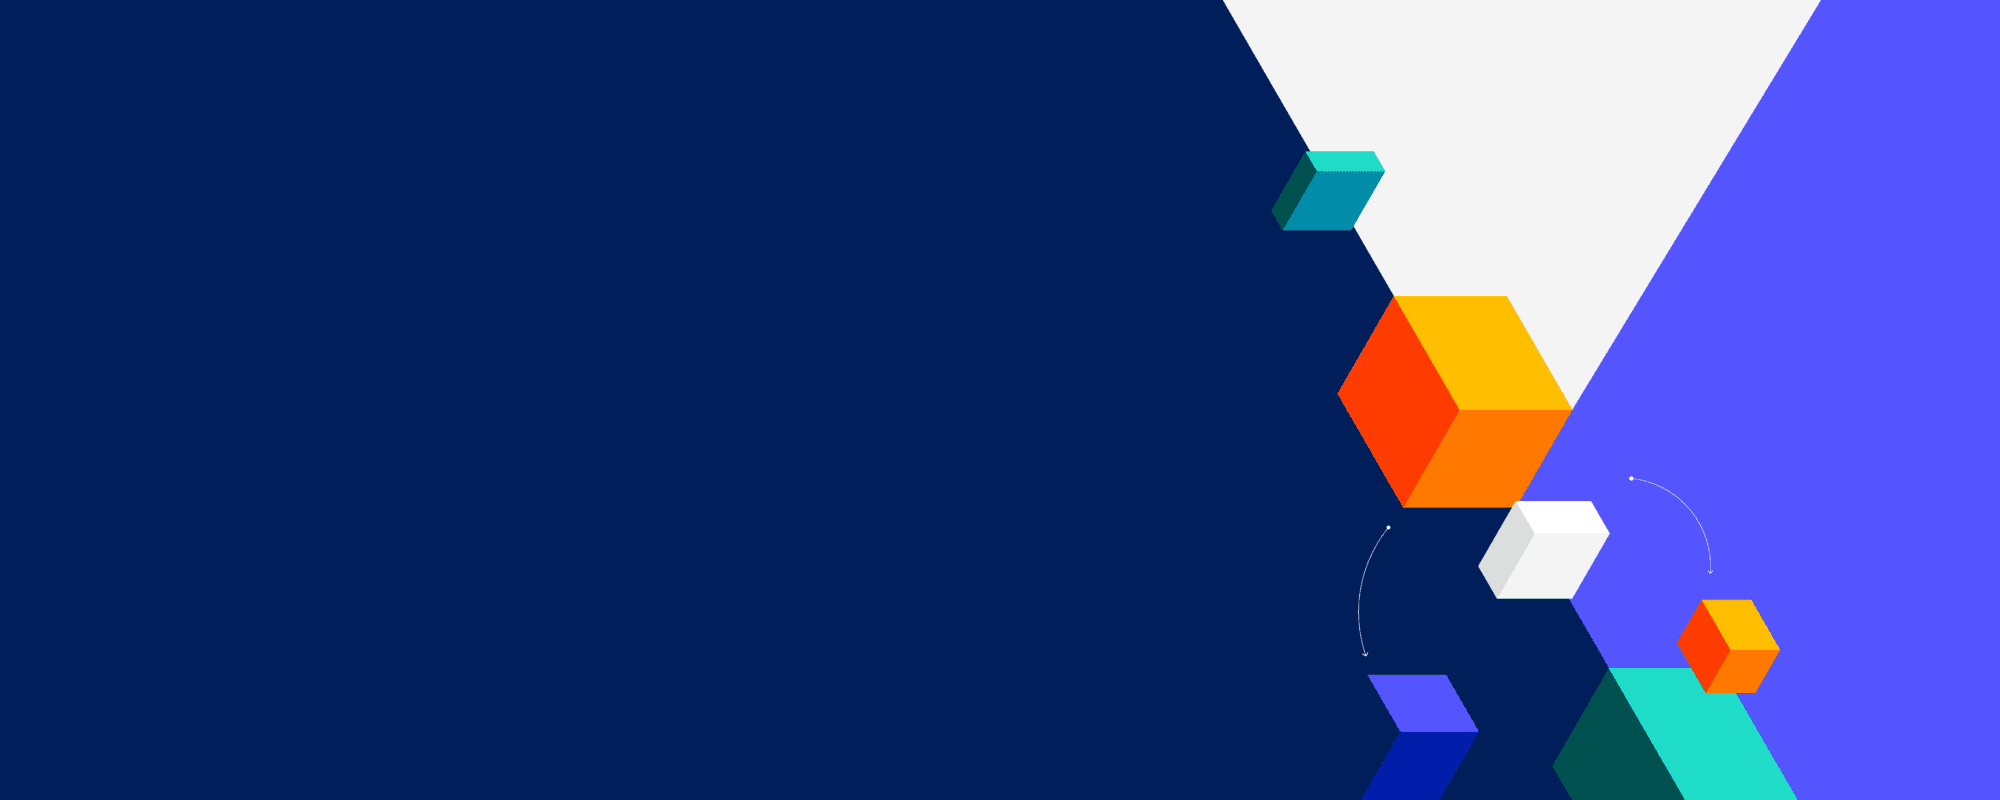 Header image with a dark blue and white background with block shapes.